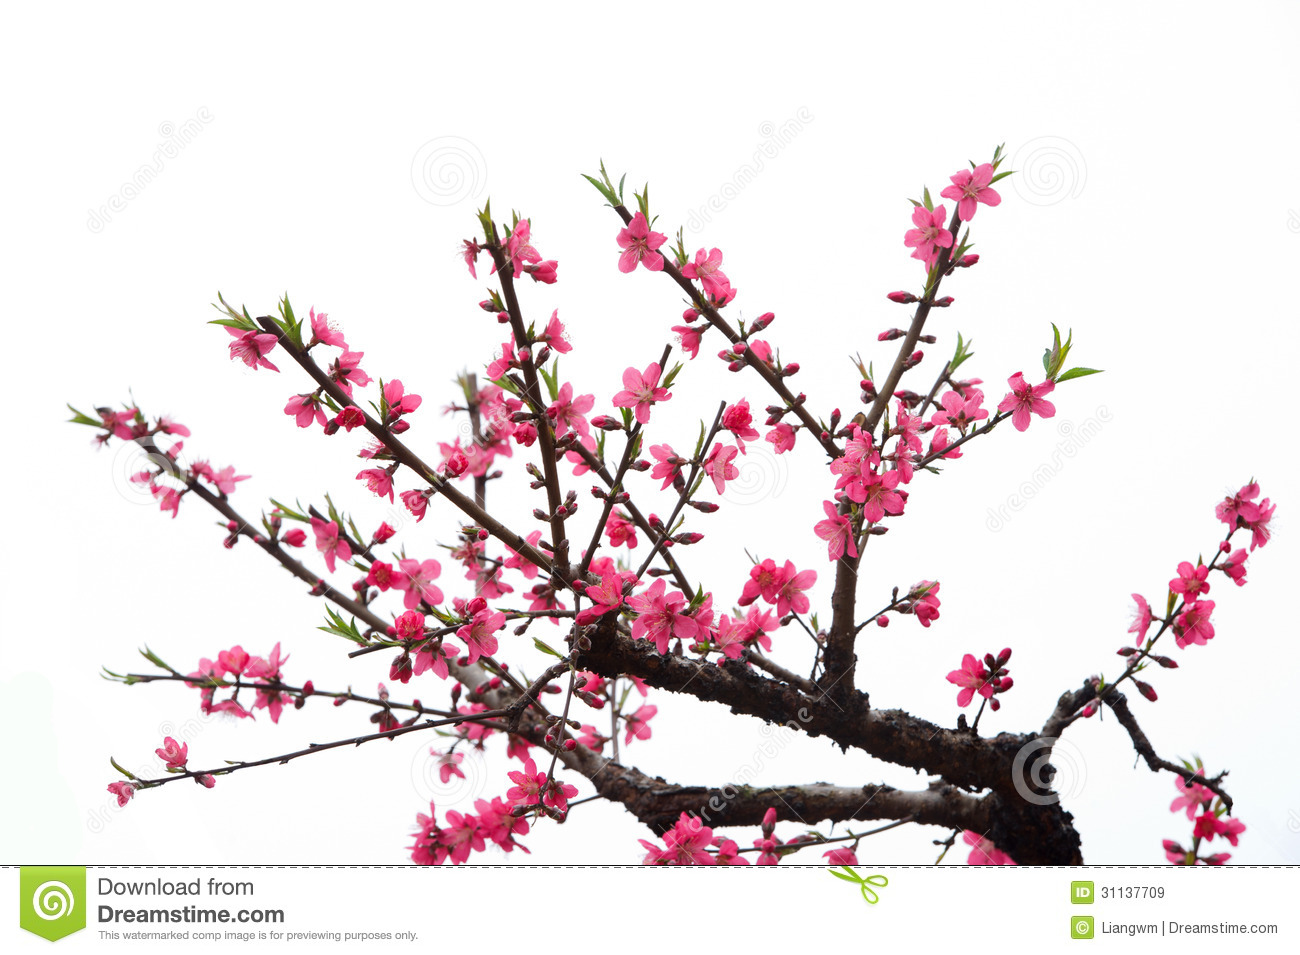 Peach Blossom Royalty Free Stock Images   Image  31137709